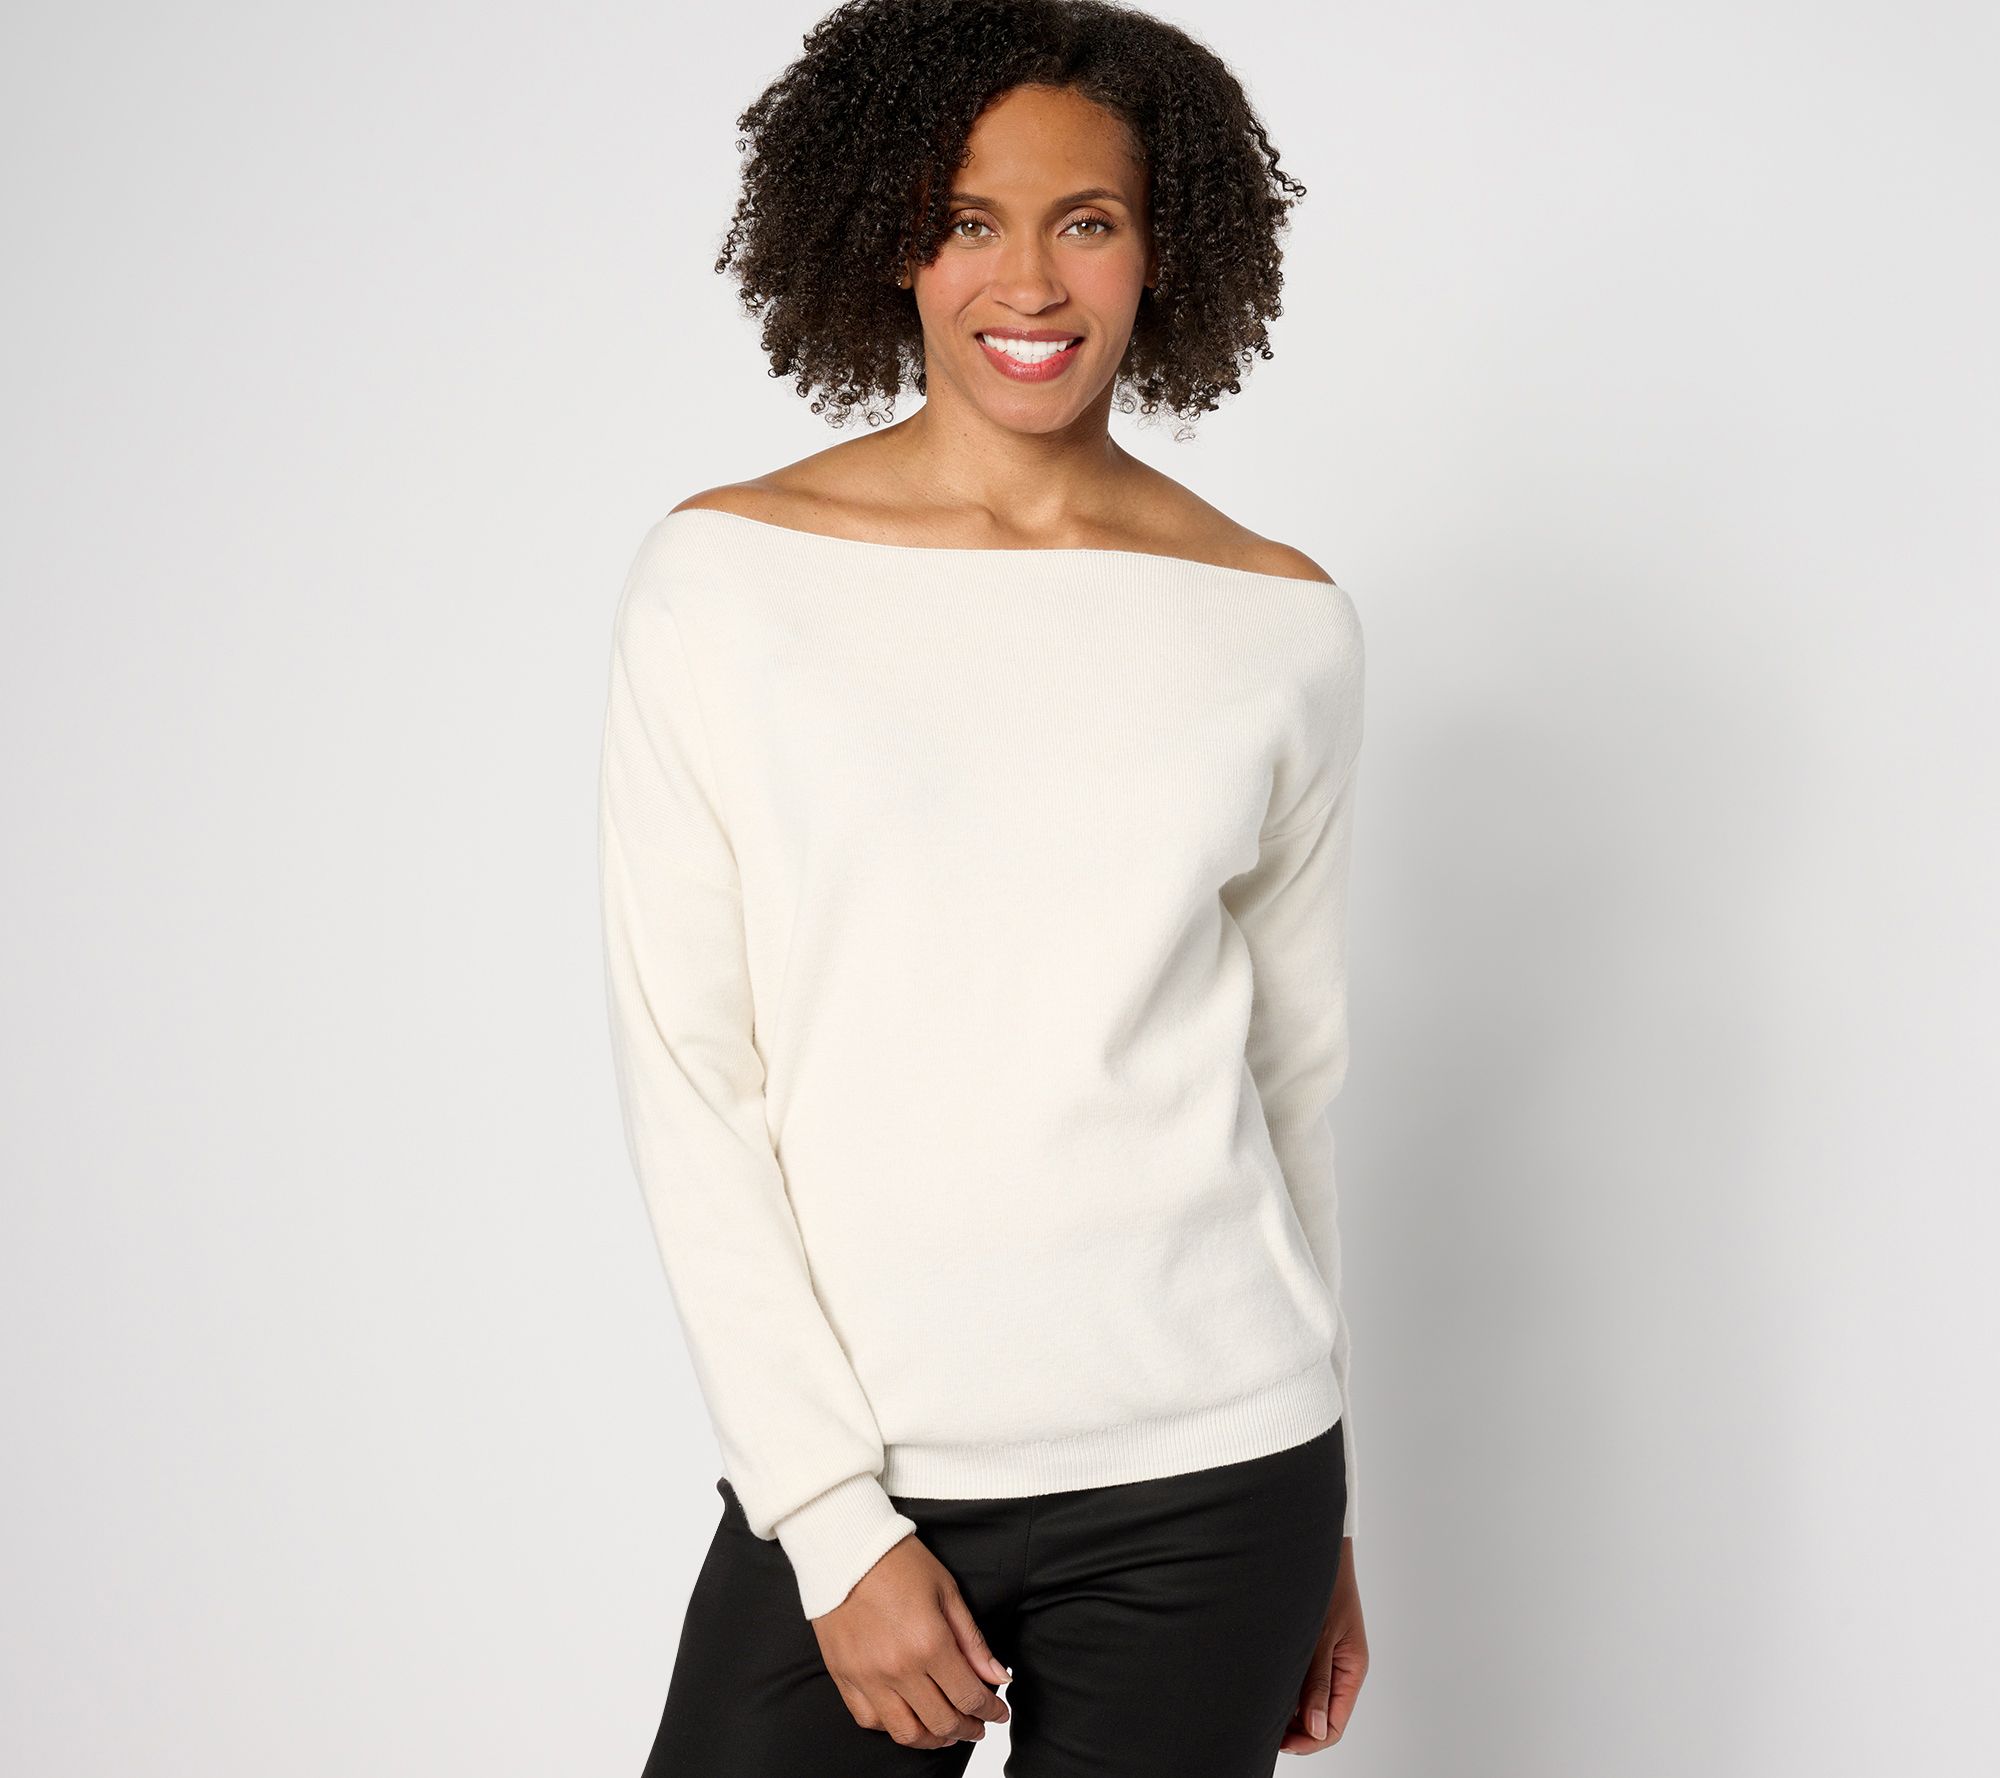 Lawrence Zarian Partners With QVC on Exclusive Fashion Collection